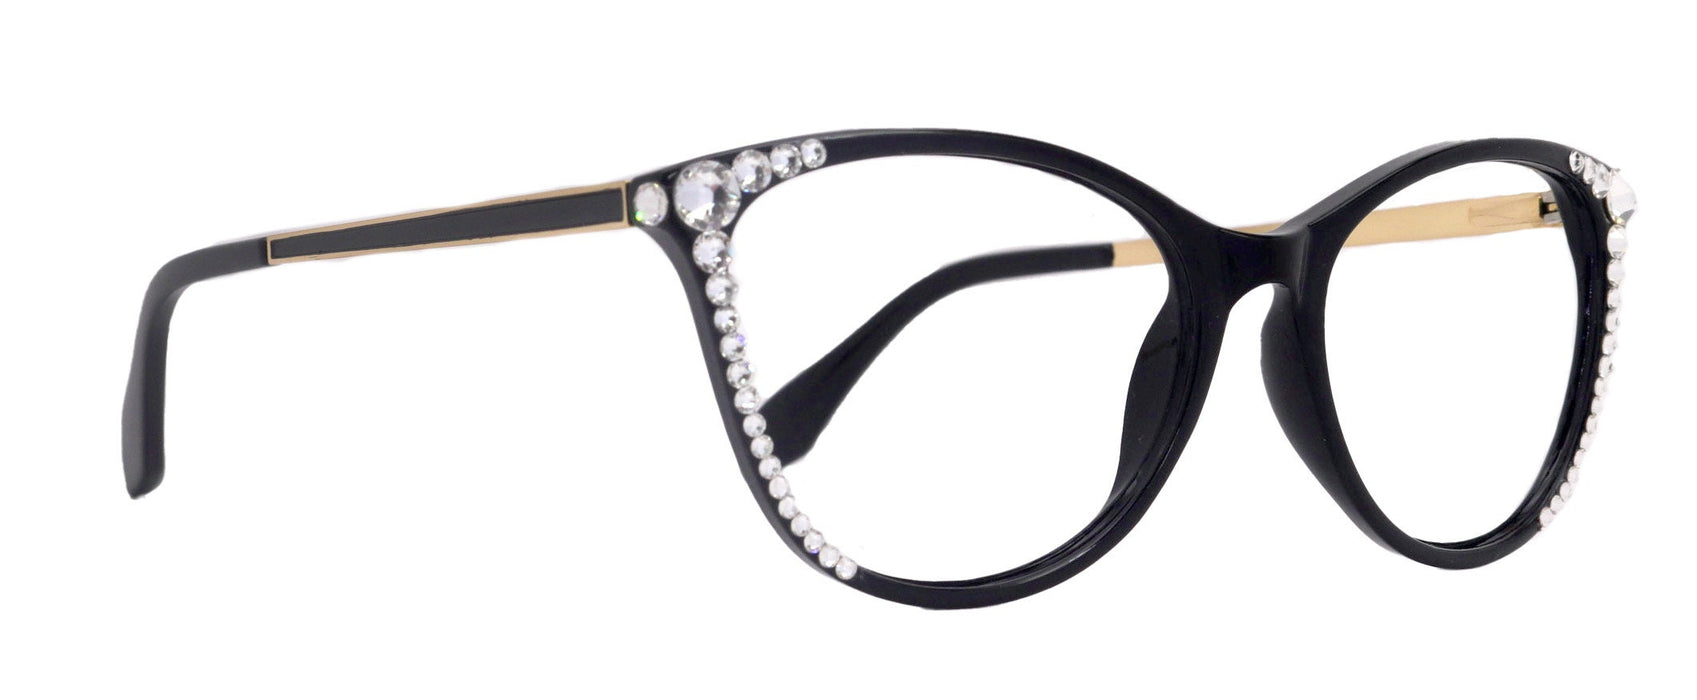 Cattitude Bling Reading Glasses 4 Women W Clear Genuine European Crystals, Magnifying Cat Eye NY Fifth Avenue